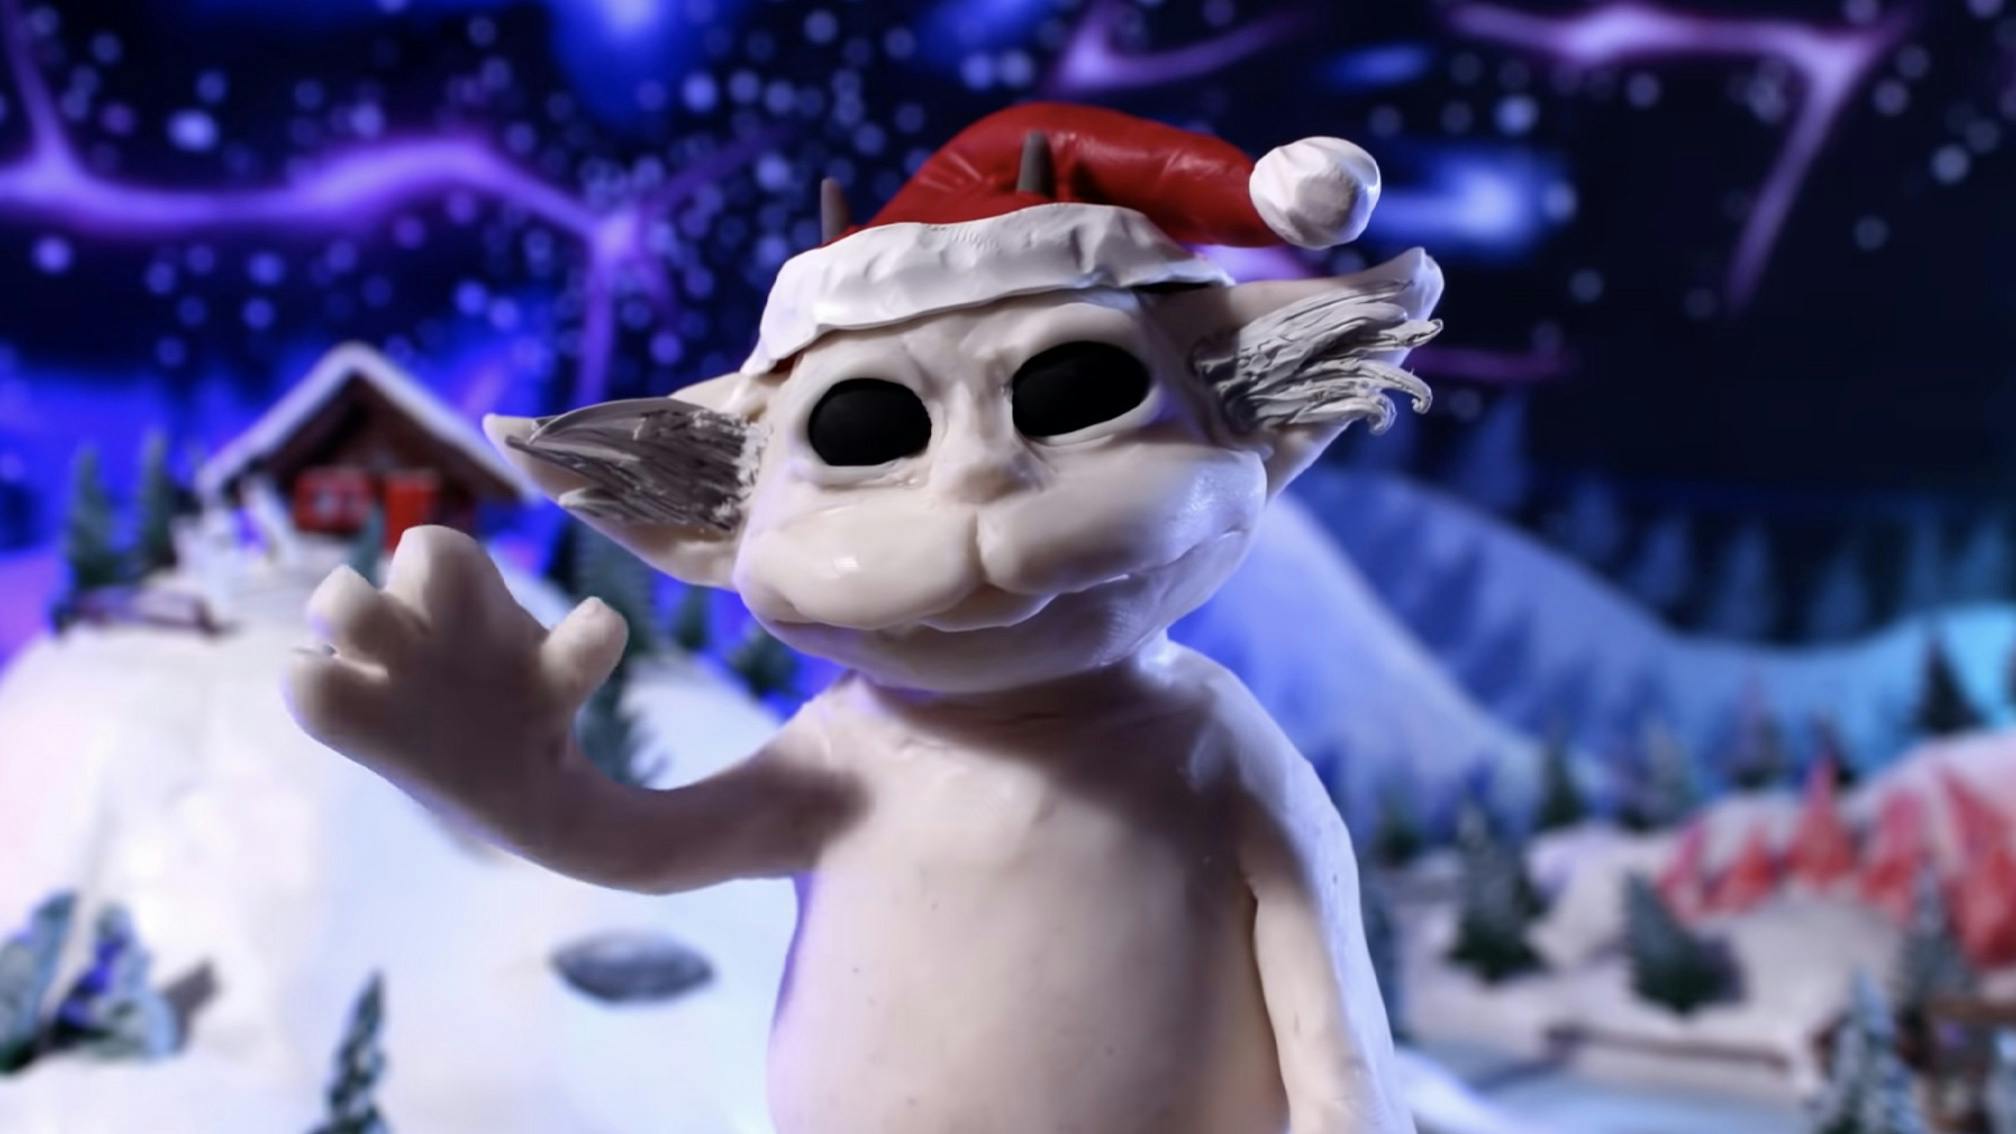 Watch twenty one pilots’ new animated video for Christmas Saves The Year